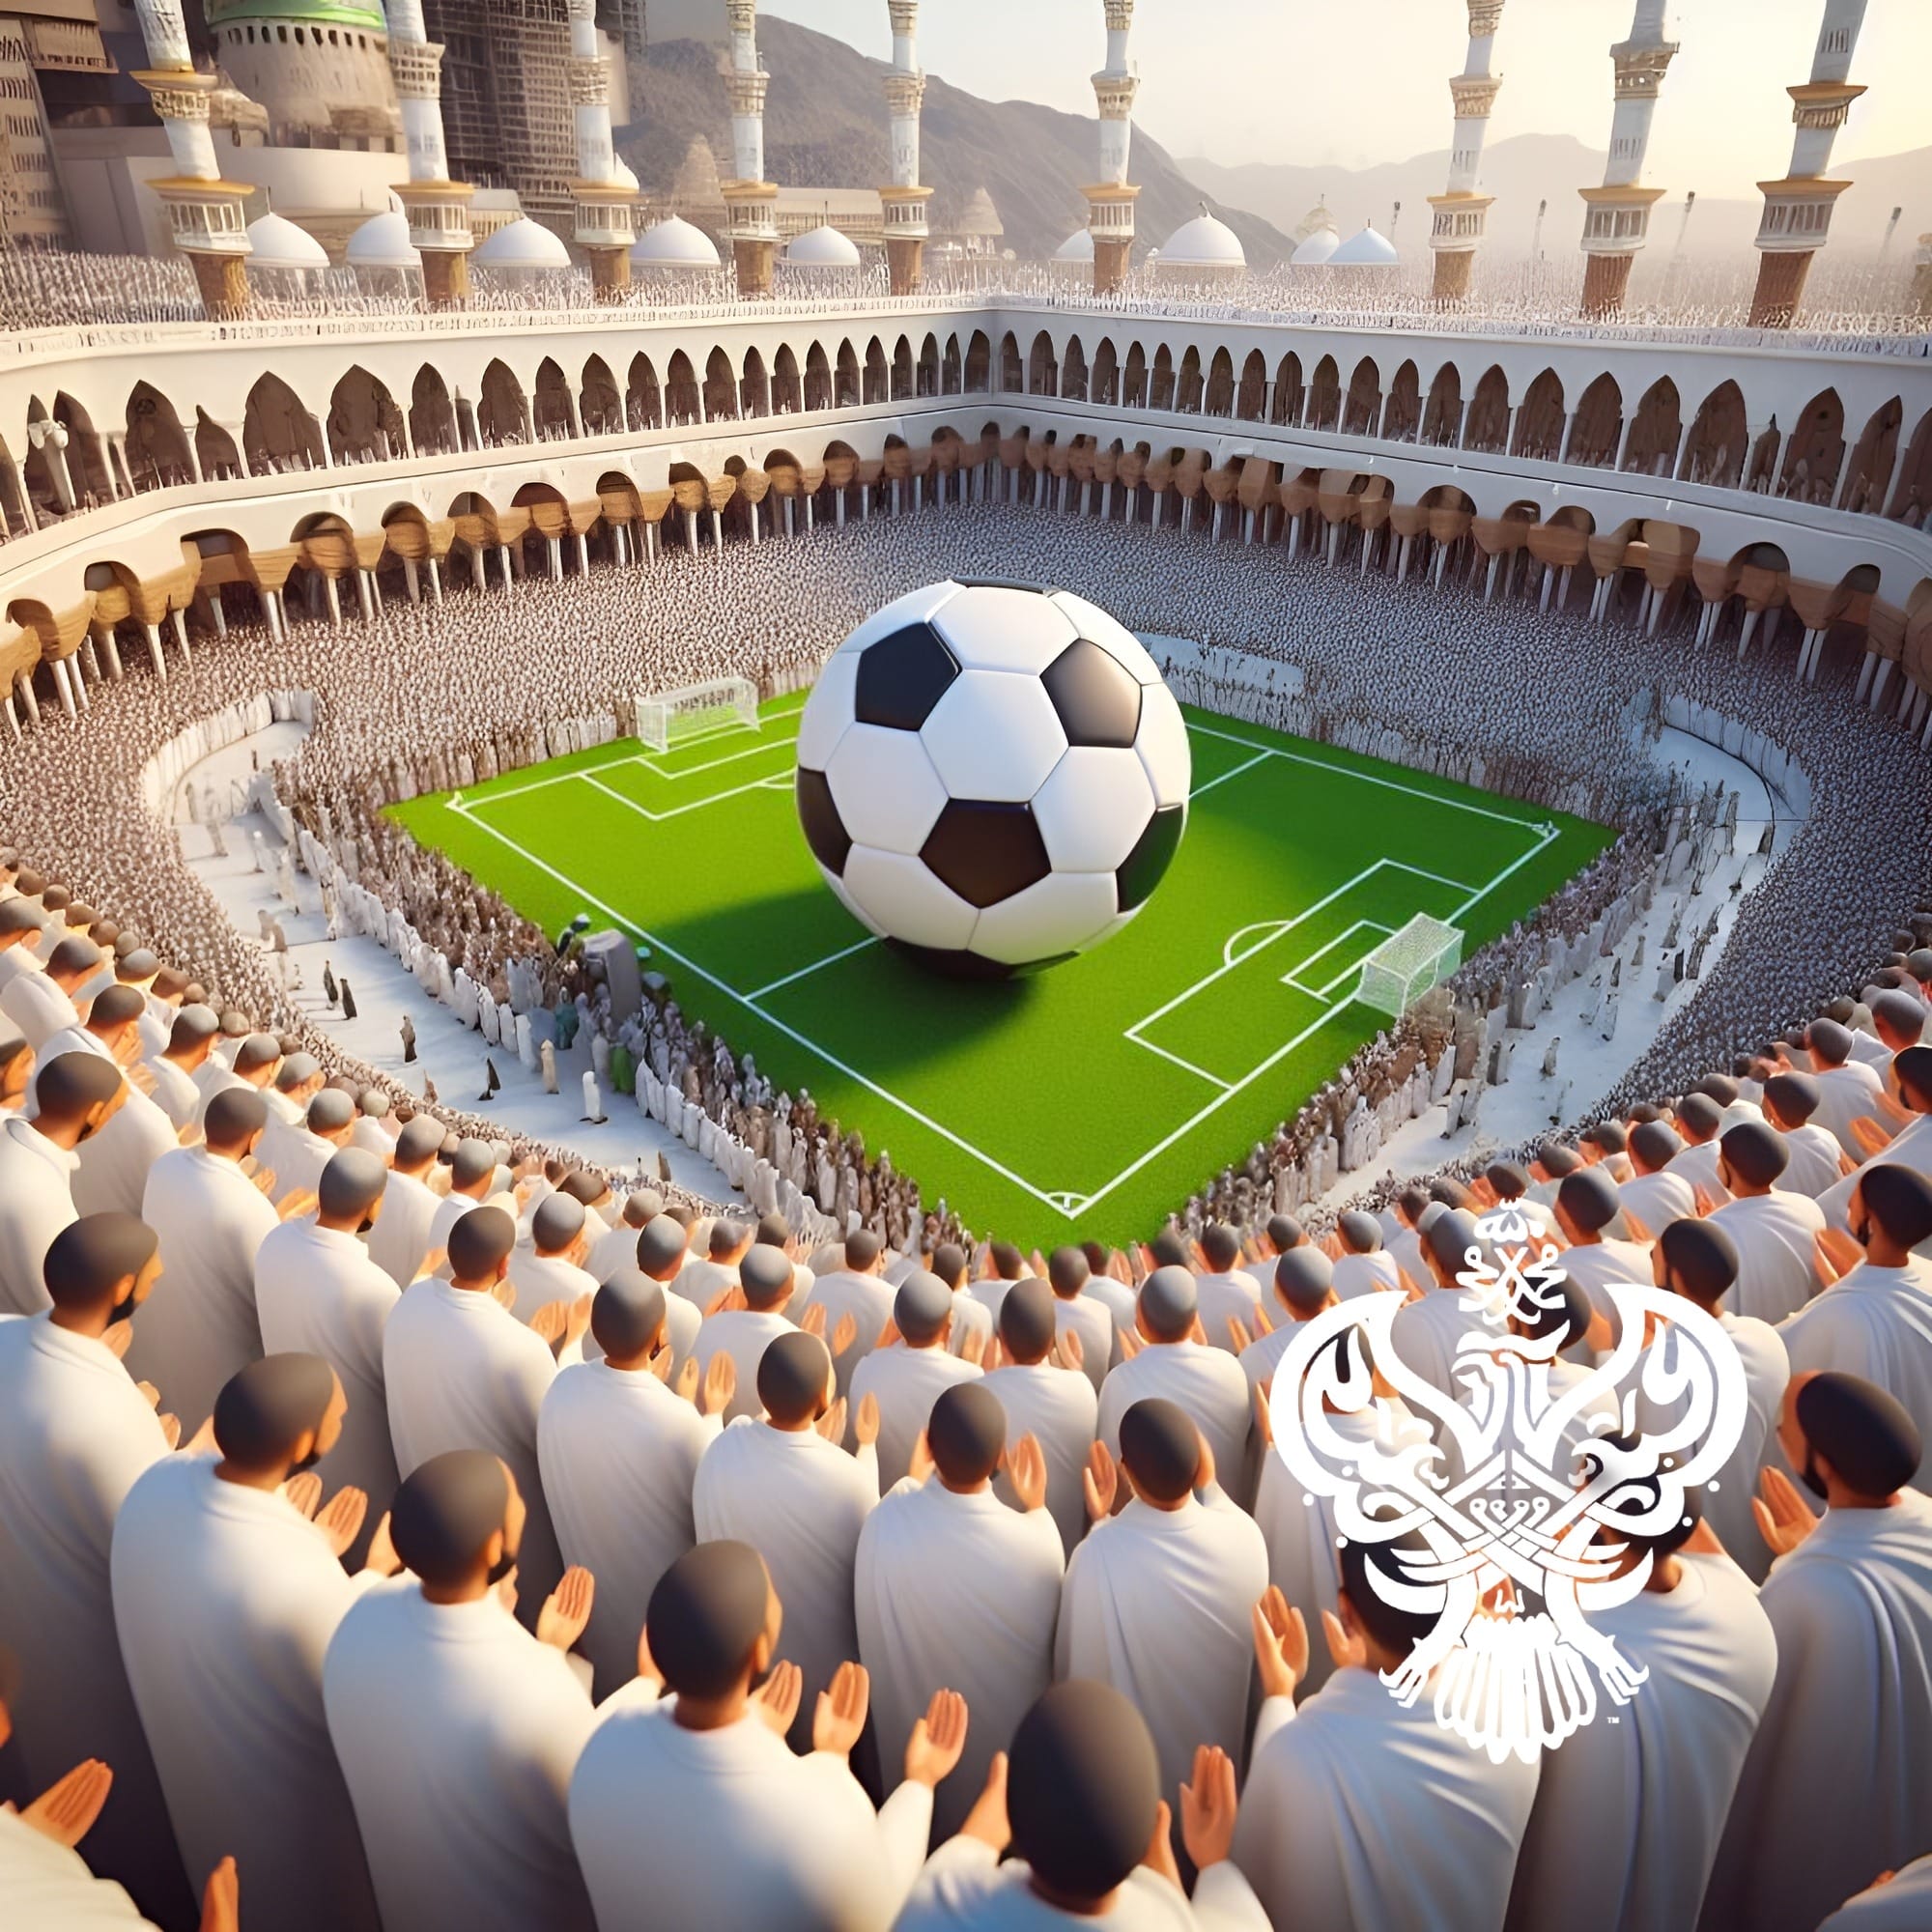 A stadium of men in religious clotes praying to a soccer ball